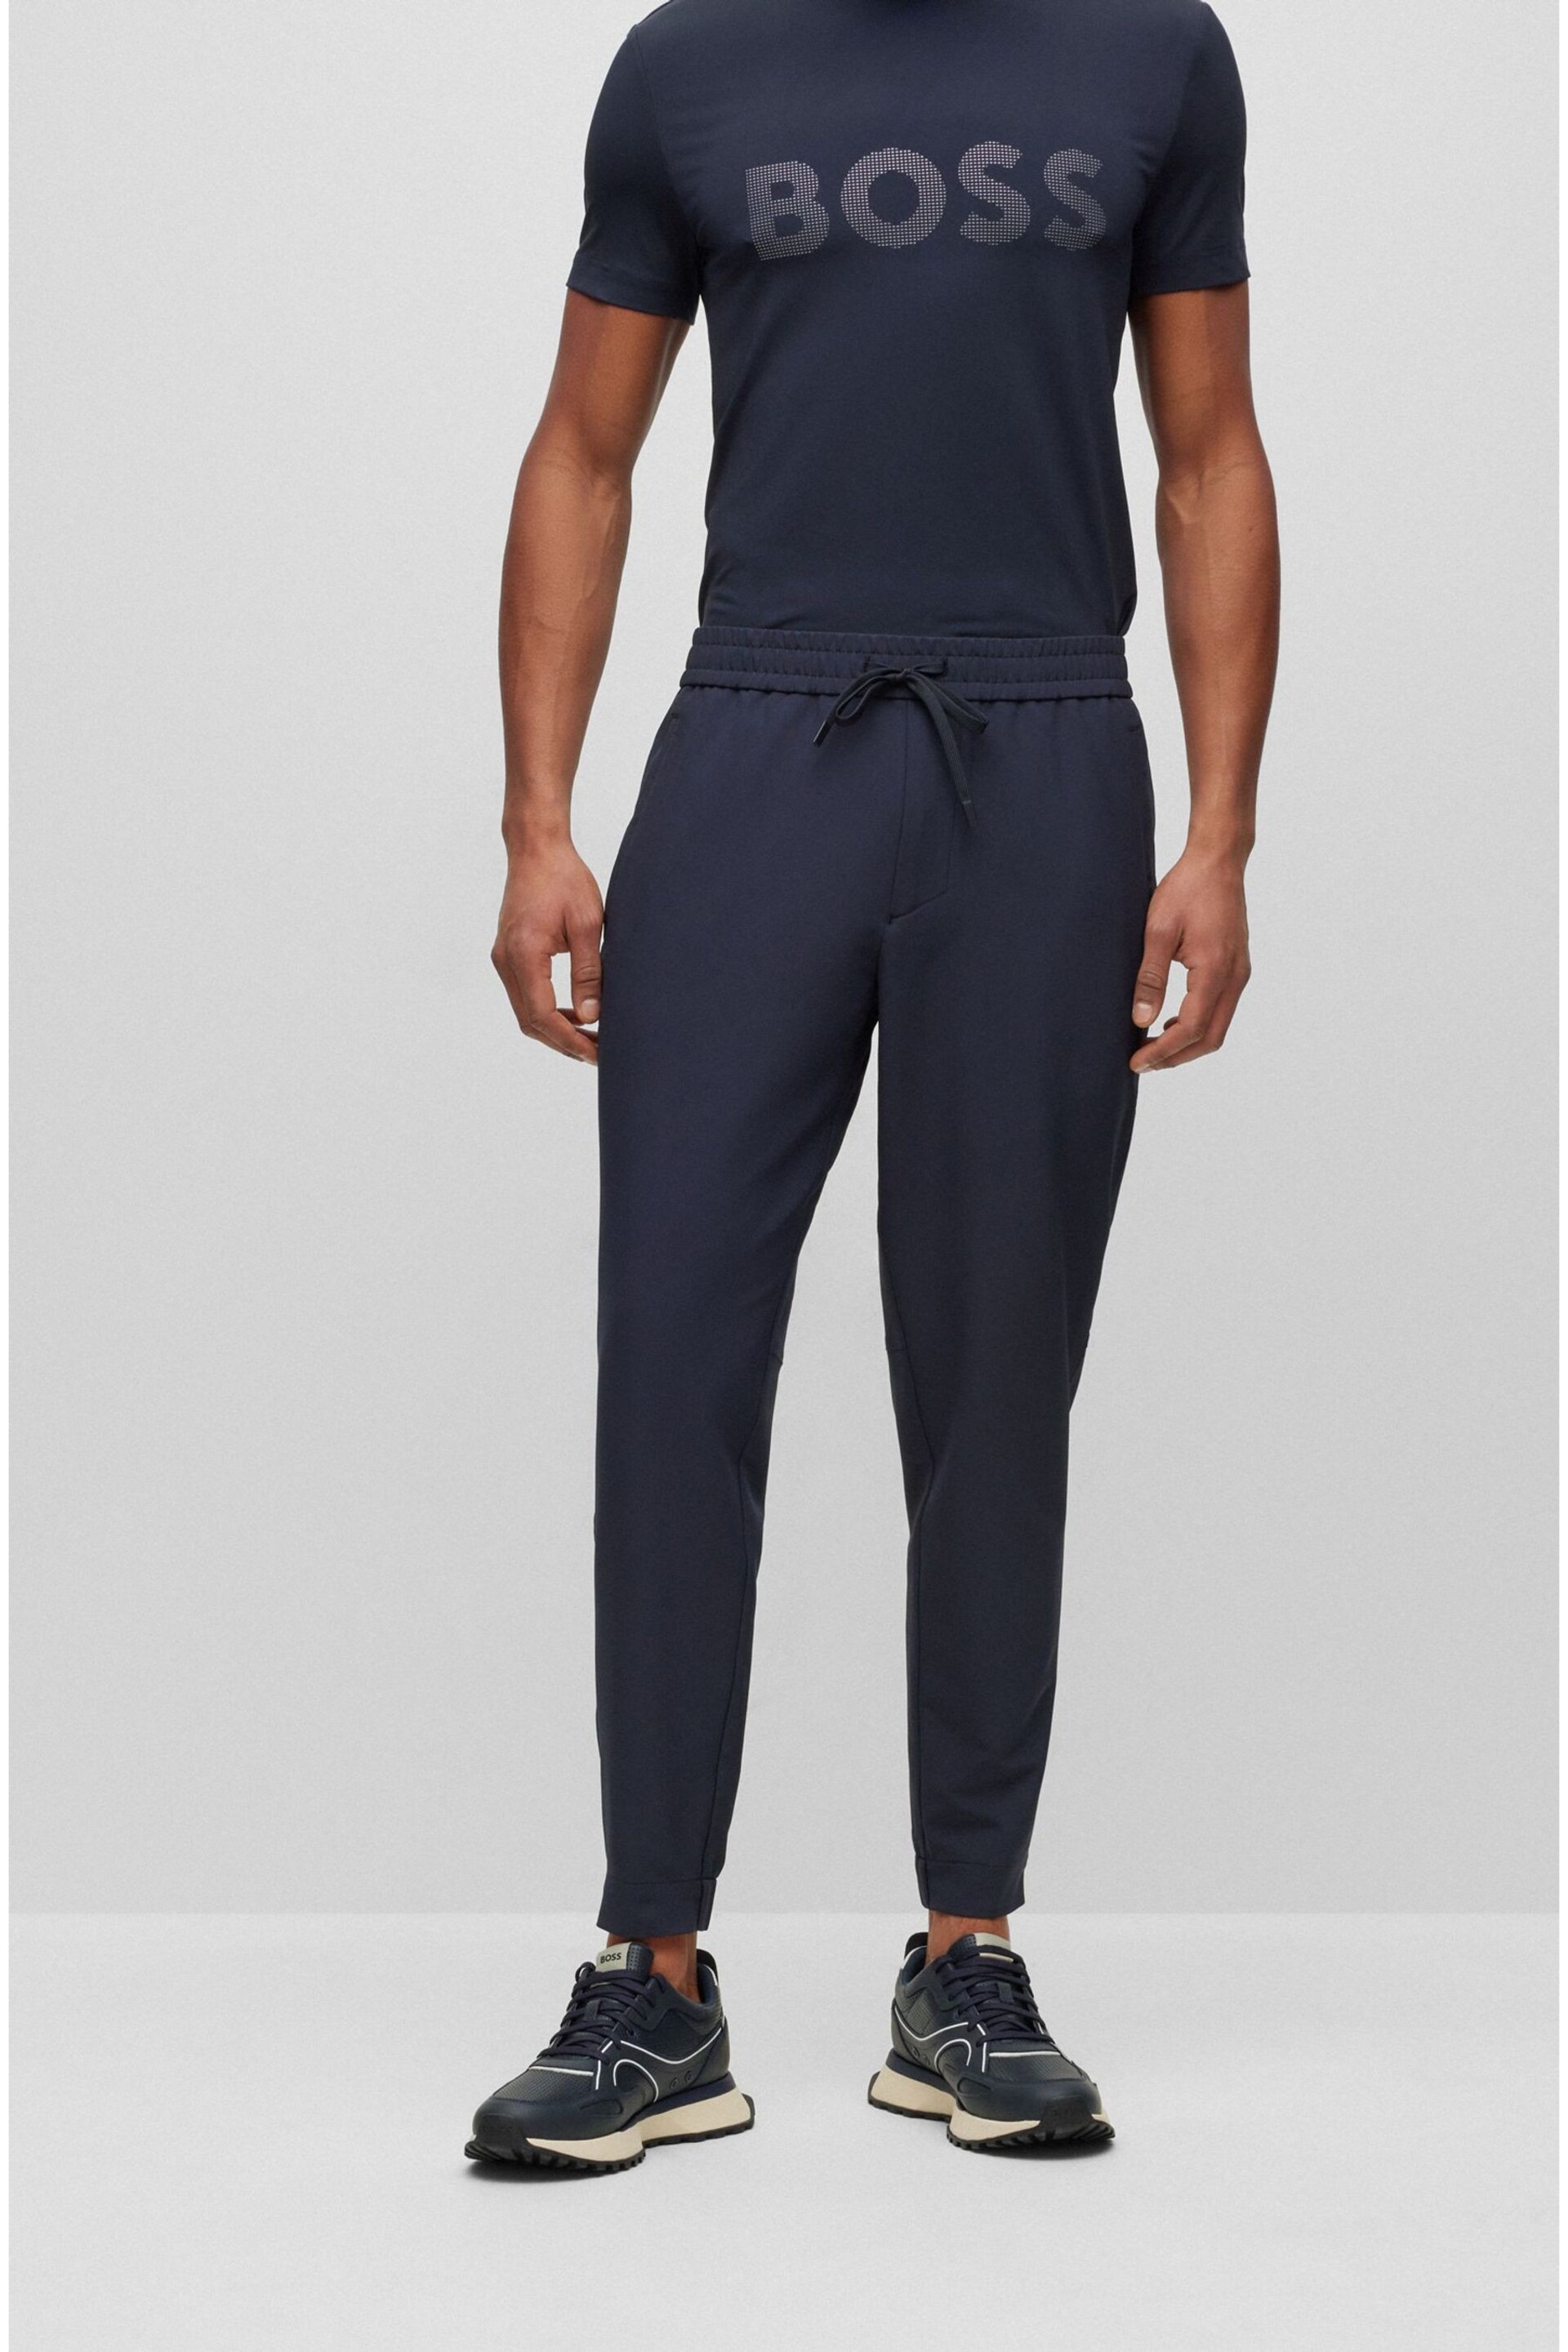 BOSS Blue Tapered Fit Joggers - Image 1 of 5